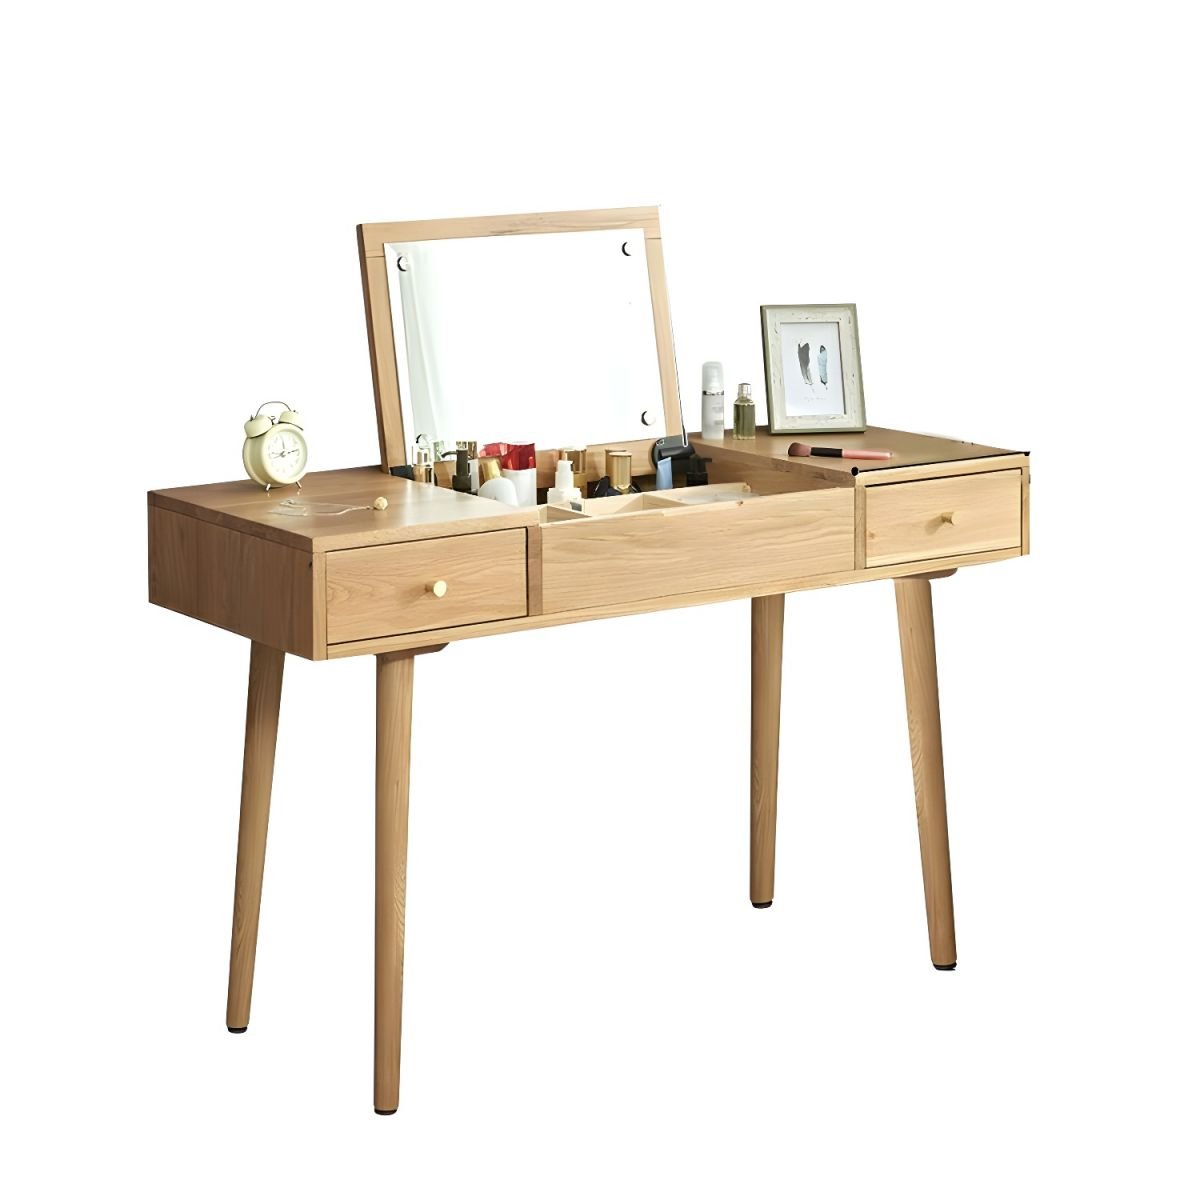 Natural Finish Standard Contemporary Dressing Table Oak Wood with Flip-Top Mirror